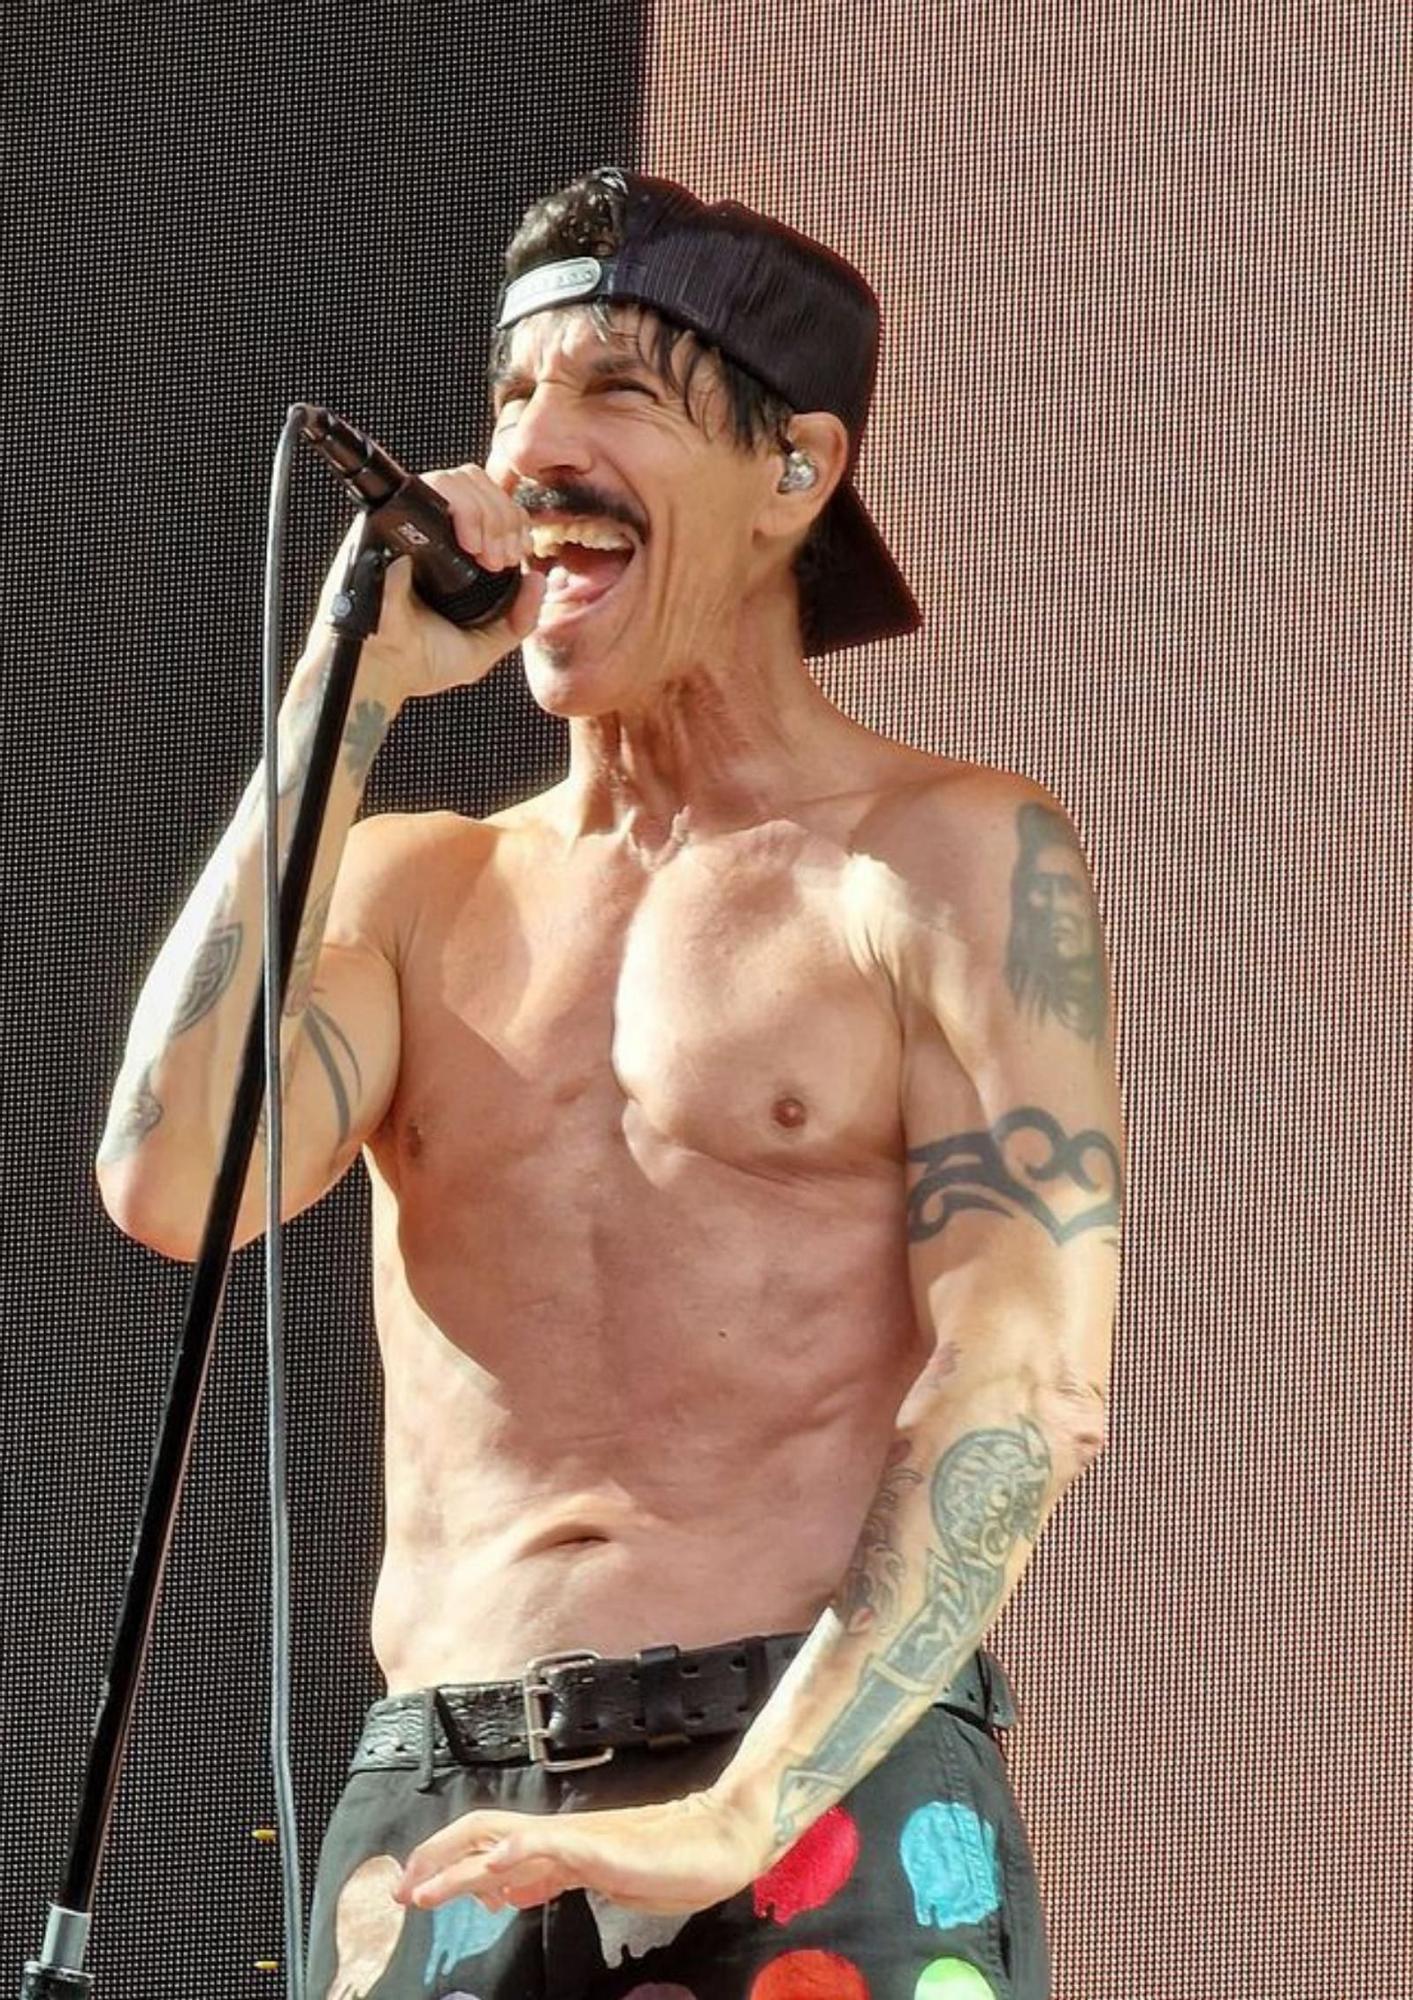 El cantante de Red Hit Chili Peppers, Anthony Kiedis.